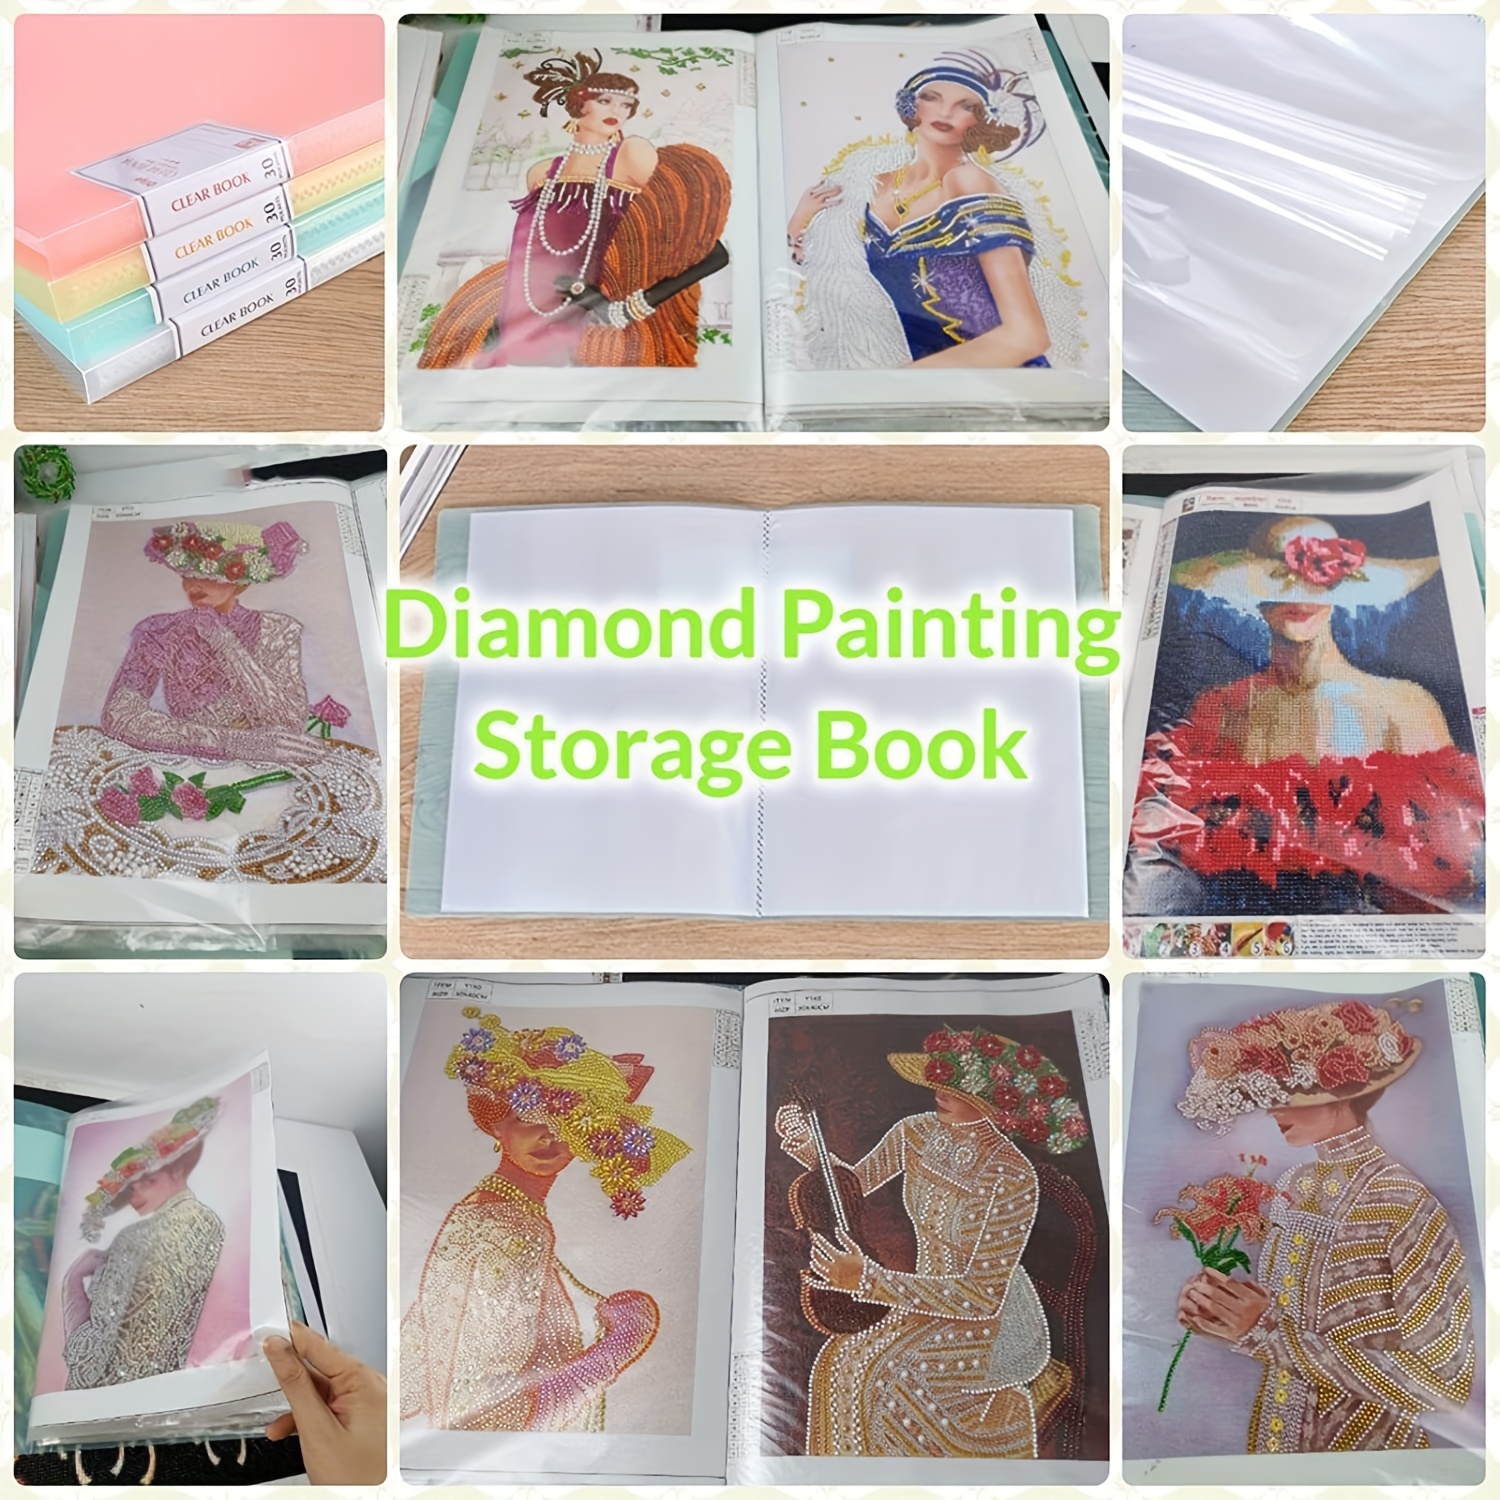 A3/a4 Artificial Diamond Painting Accessories Storage Book, Large